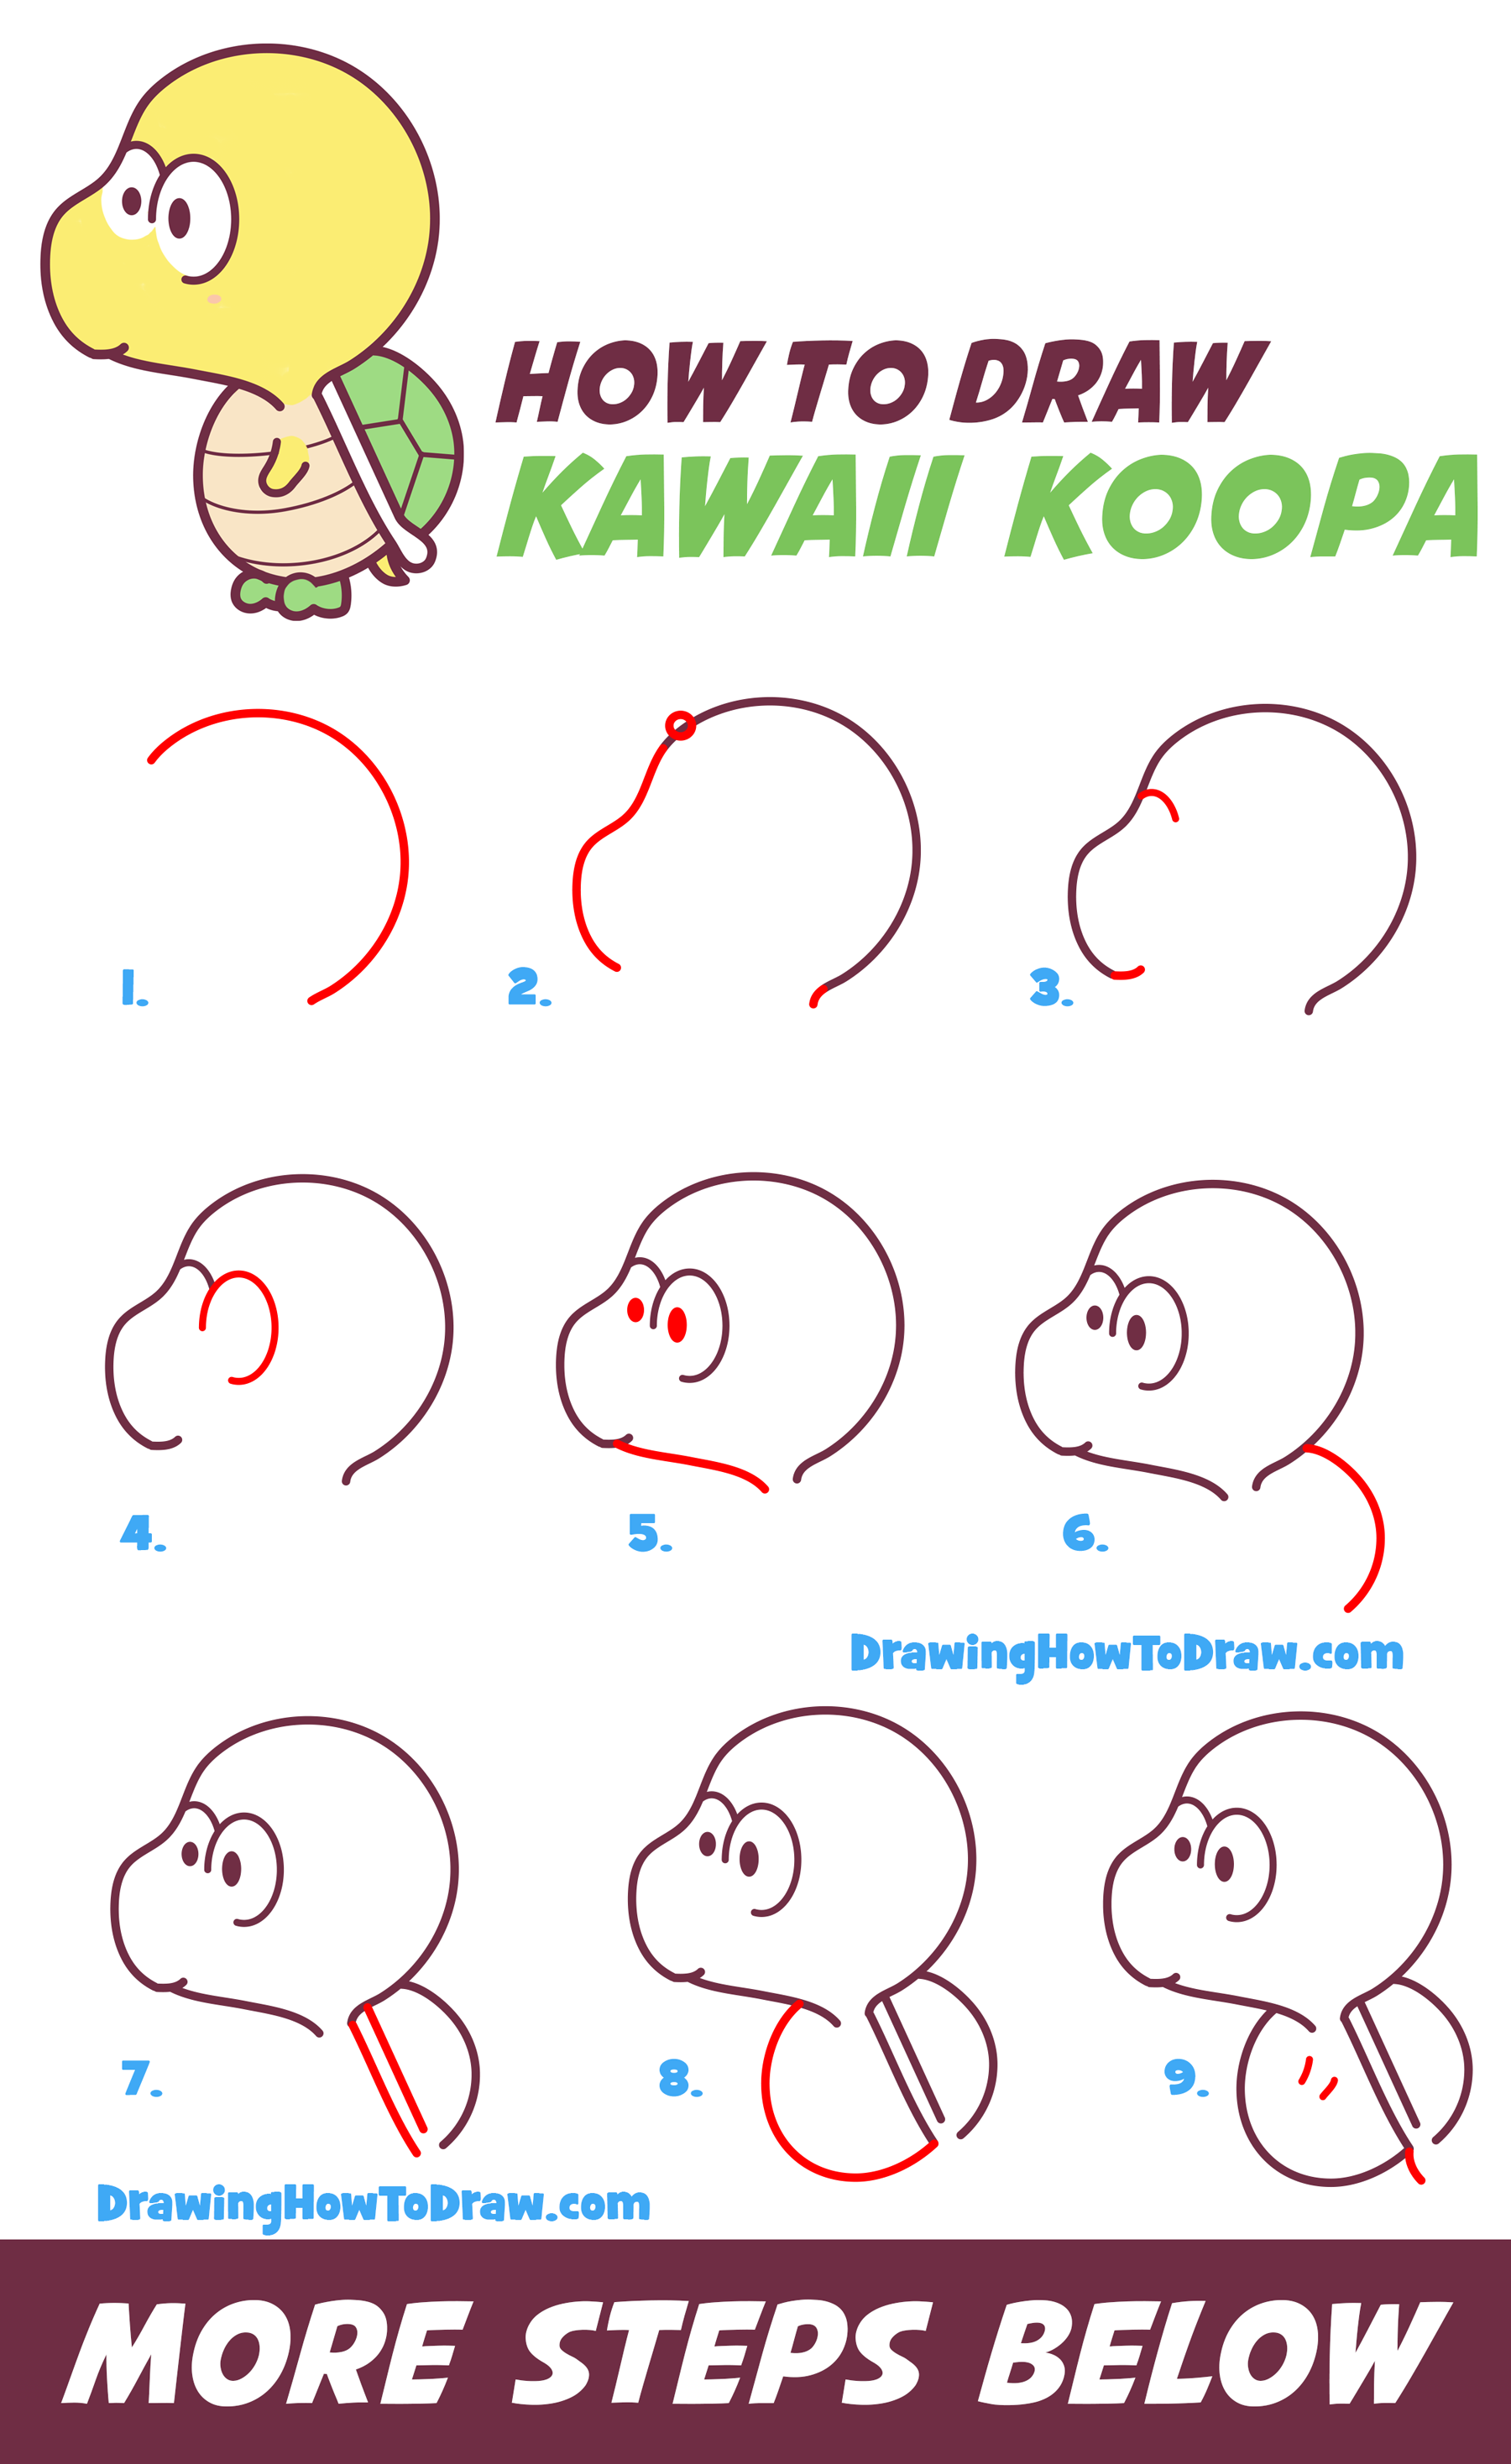 How to Draw Koopa from Super Mario Bros (Chibi / Kawaii / Baby Style) Easy Step by Step Drawing Tutorial